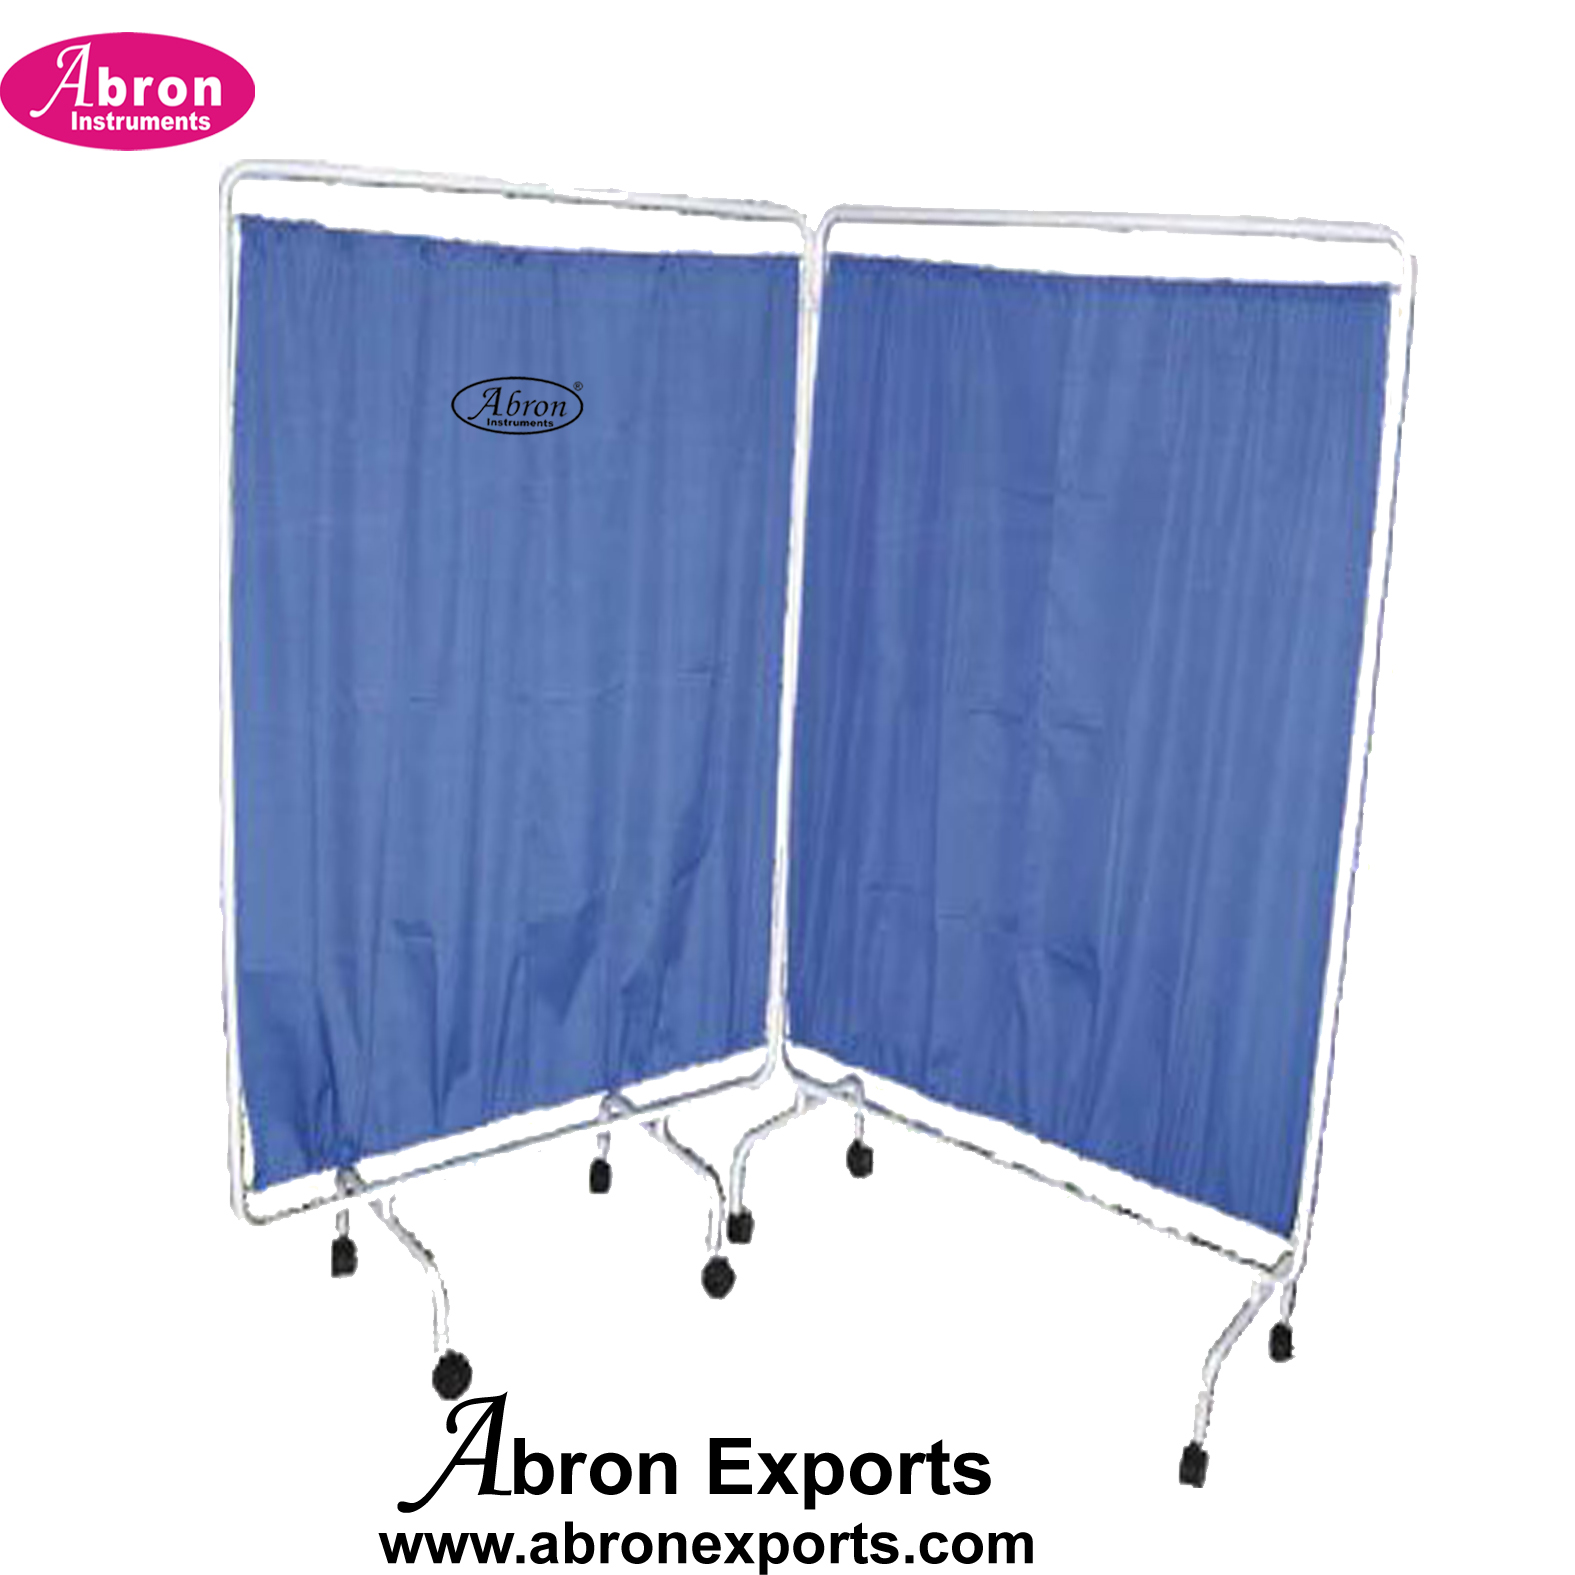 Hospital Medical bedside screens 2 four x2 feet 175cm partion with curtons steel frame with wheels Abron ABM-2355-S2P 